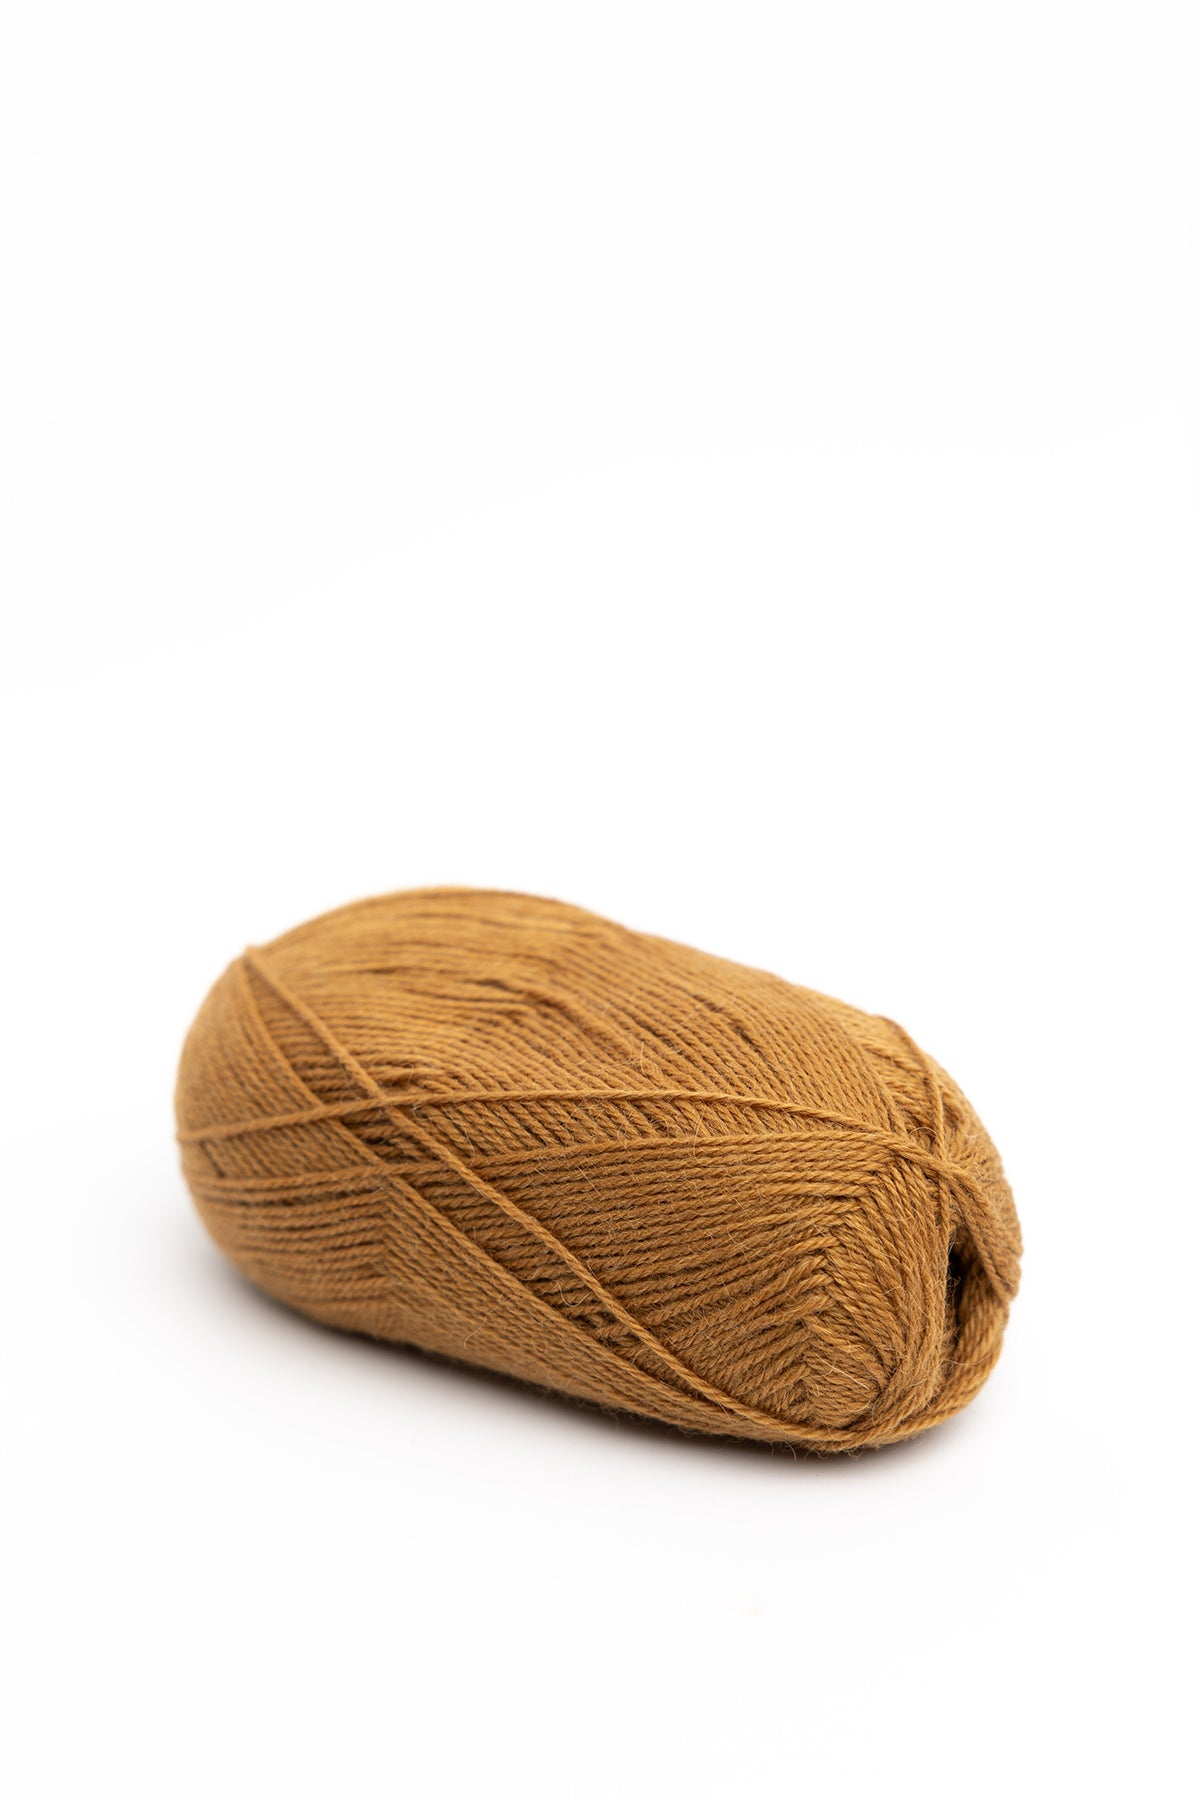 Drops Flora - Sand (31) - 50g - Wool Warehouse - Buy Yarn, Wool, Needles &  Other Knitting Supplies Online!